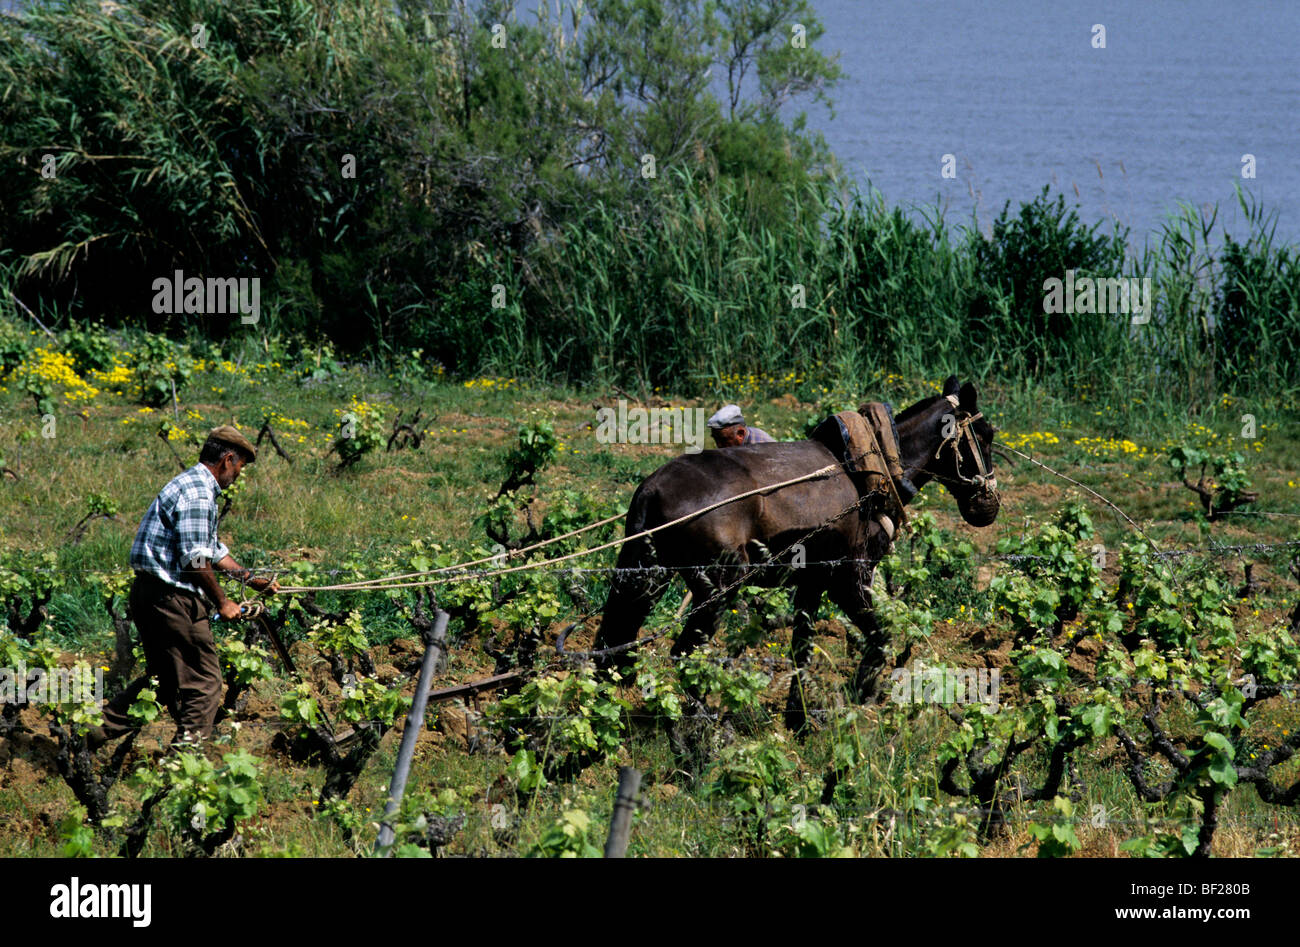 A horse, driven on reins by a farmer, pulls a traditional plough through a field in the Algarve, southern Portugal Stock Photo